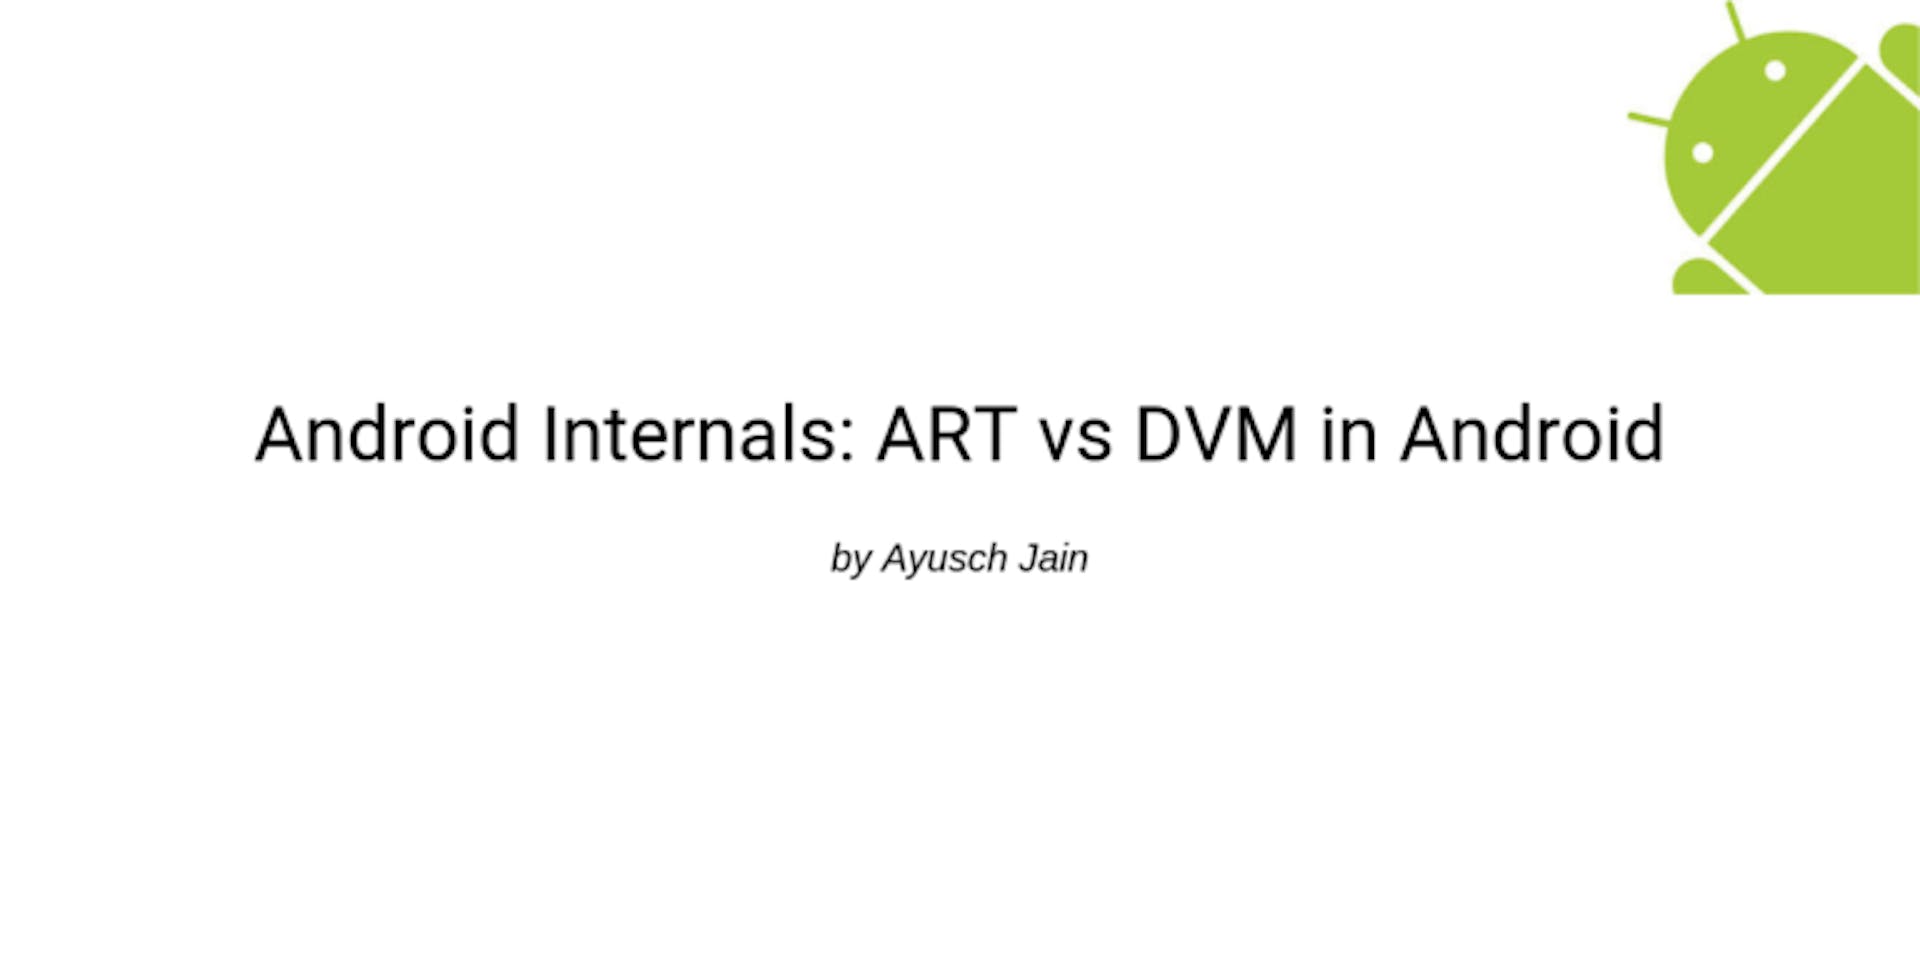 featured image - Android Internals: ART vs DVM deep dive